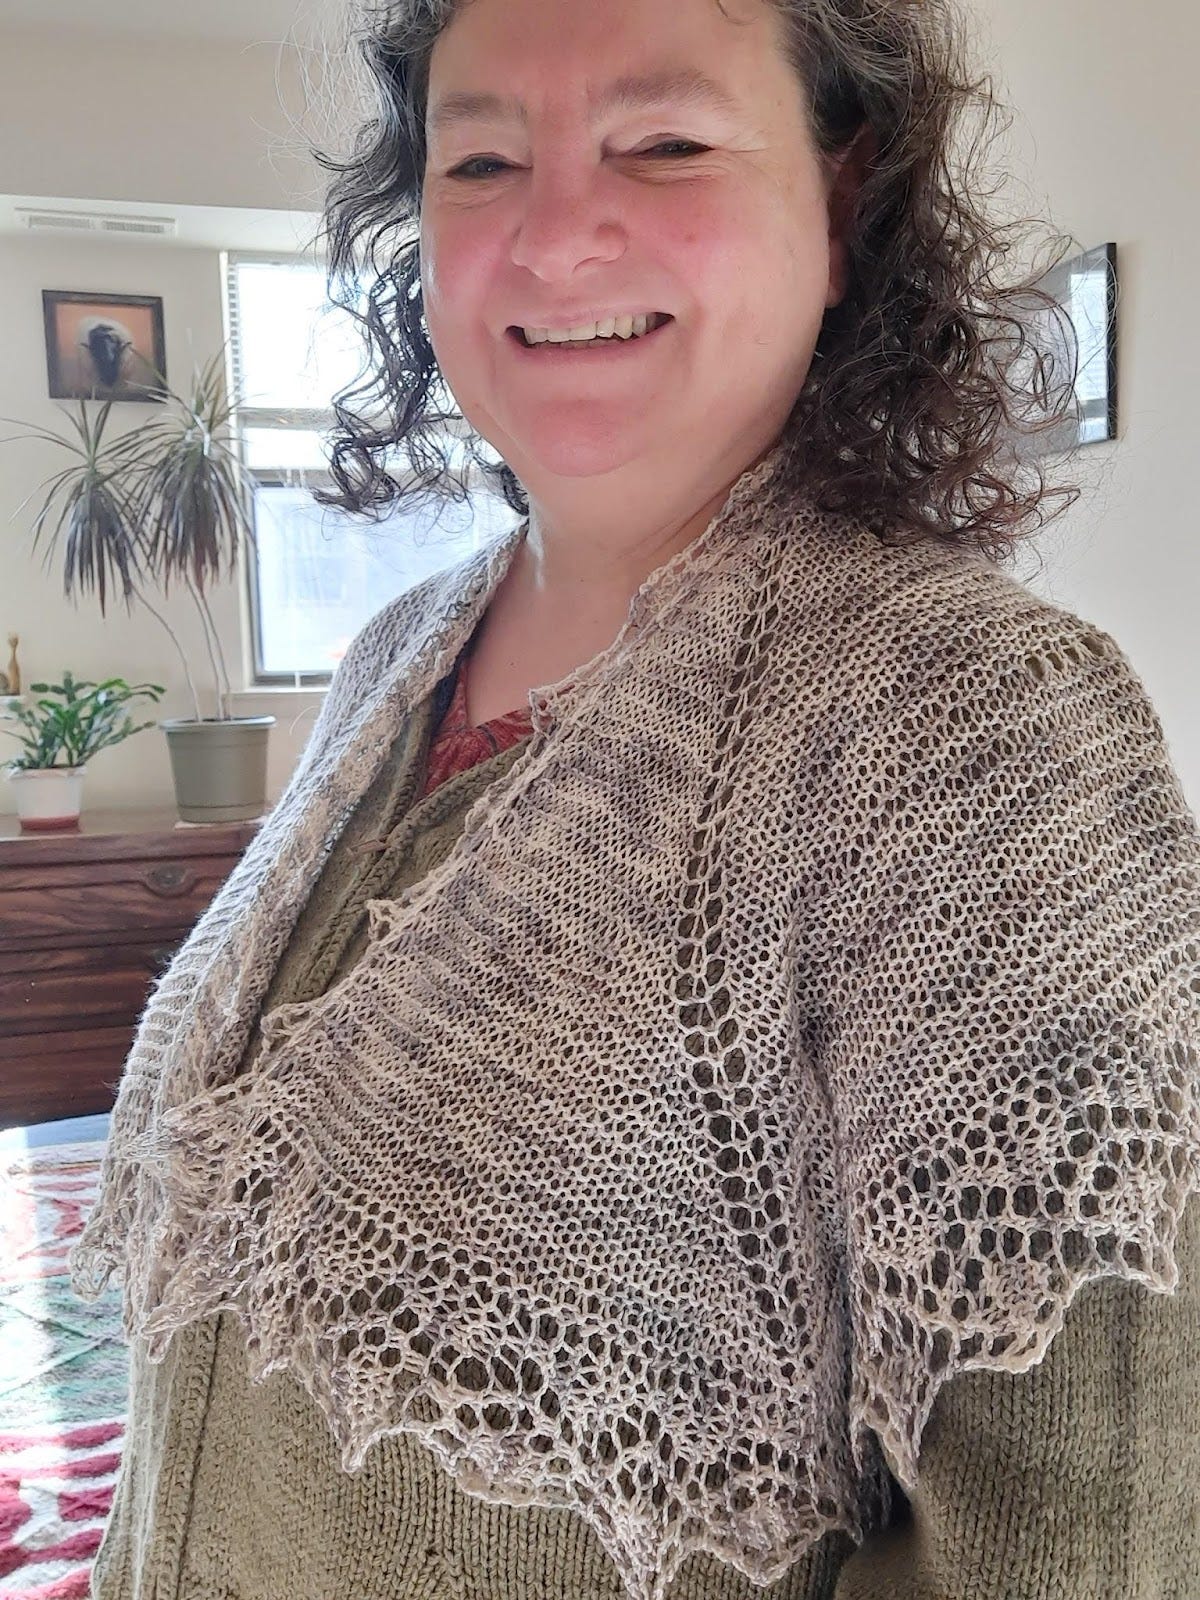 Brown curl haired woman is wearing a gray and white shawl. In the background is a picture of a sheep and some plants.